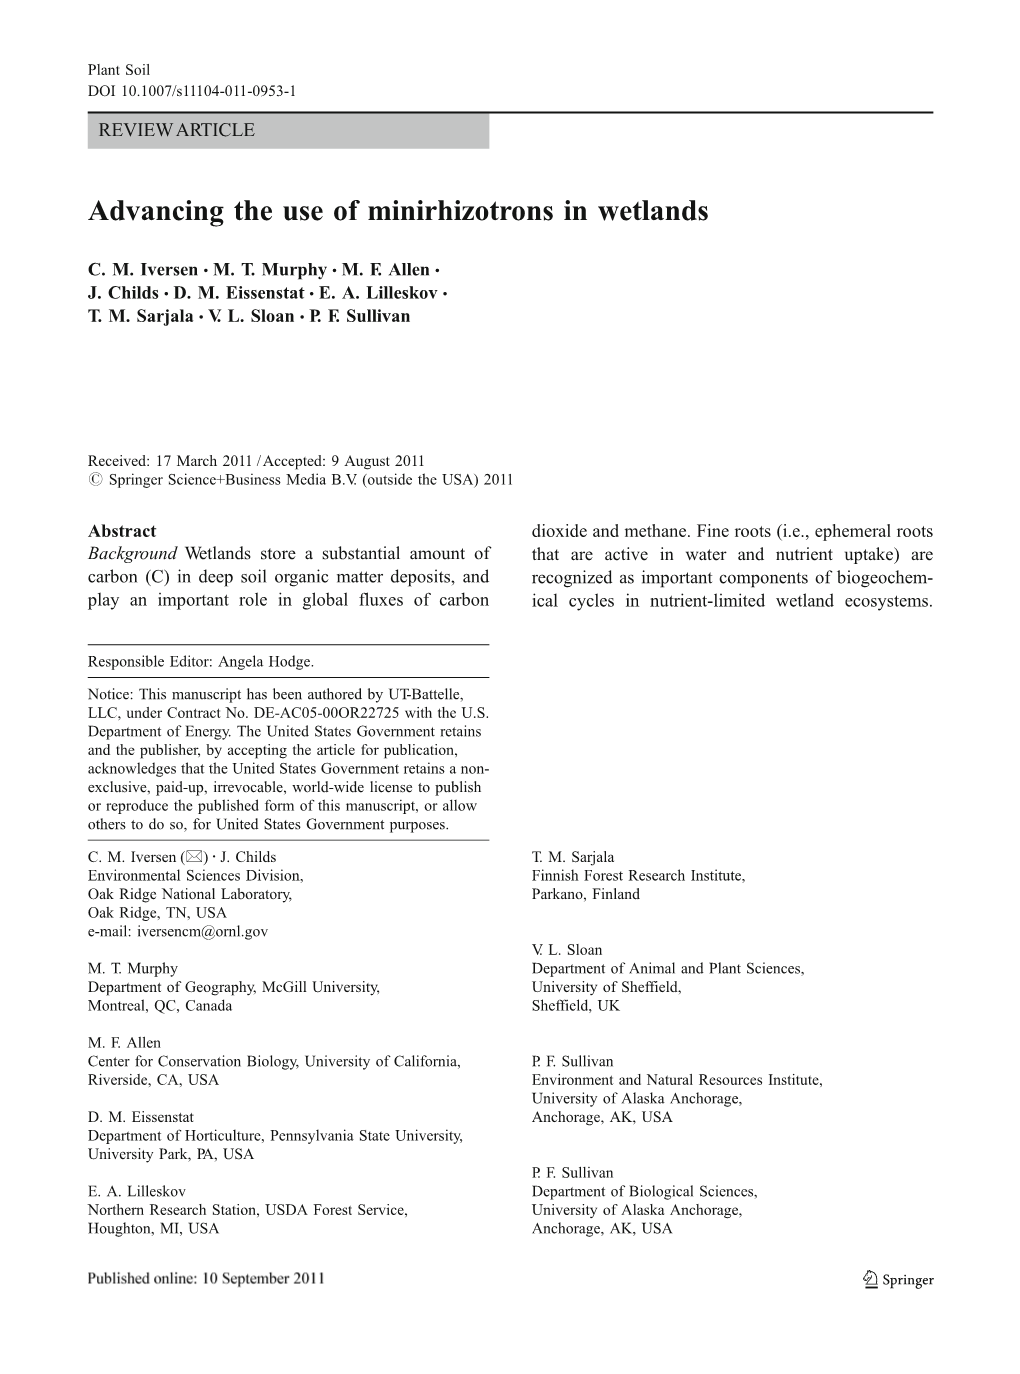 Advancing the Use of Minirhizotrons in Wetlands